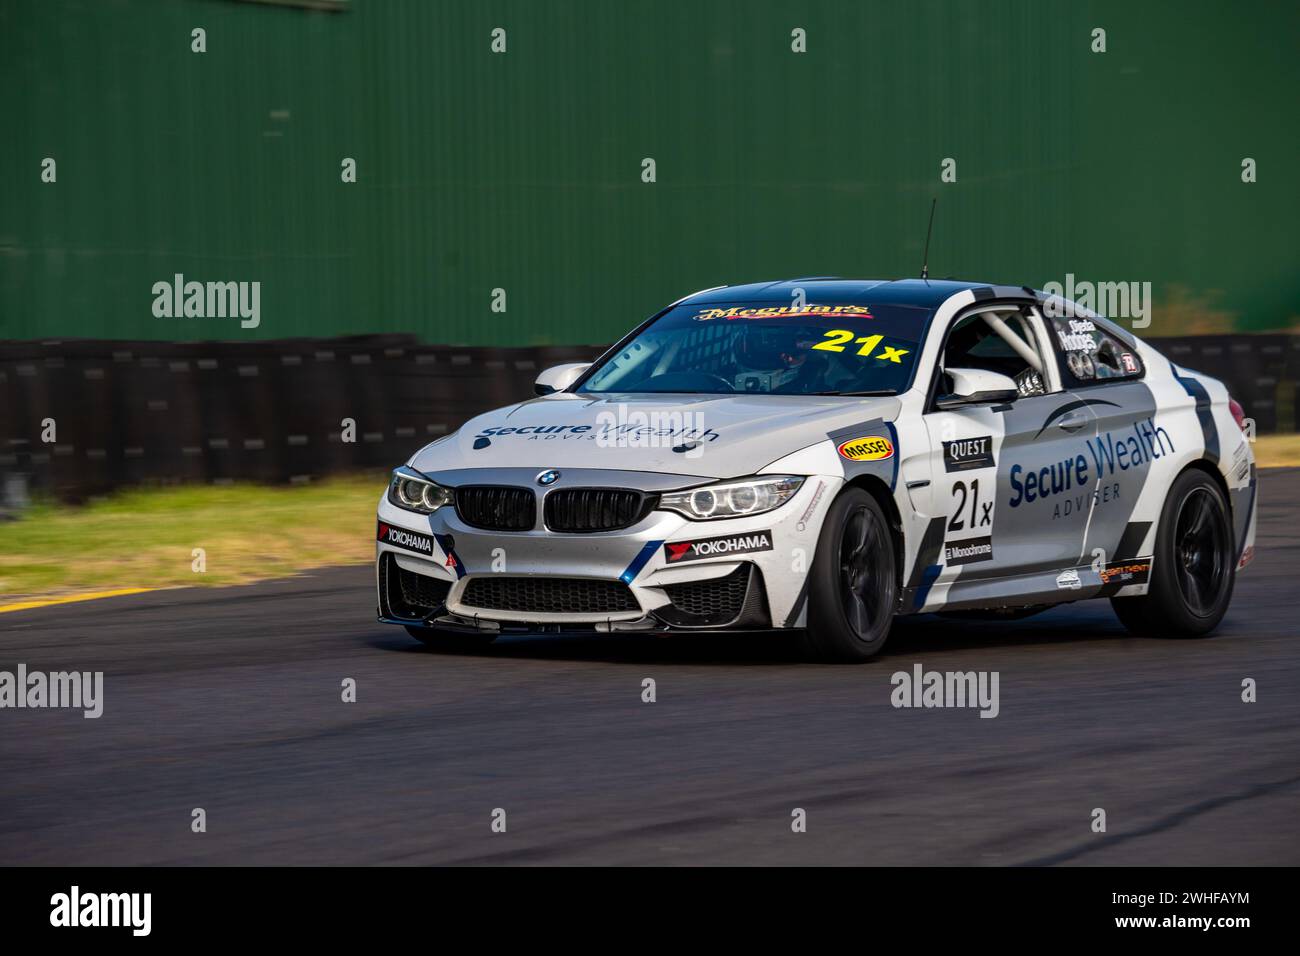 Sandown Park, Australia. 10 February, 2024. Jayden Ojeda (#21) navigates Turn 3 in his BMW M4 during Race 1 of the 2024 Australian Production Car Series on Saturday at the Shannon’s Speed Series Race Sandown Credit: James Forrester/Alamy Live News Stock Photo